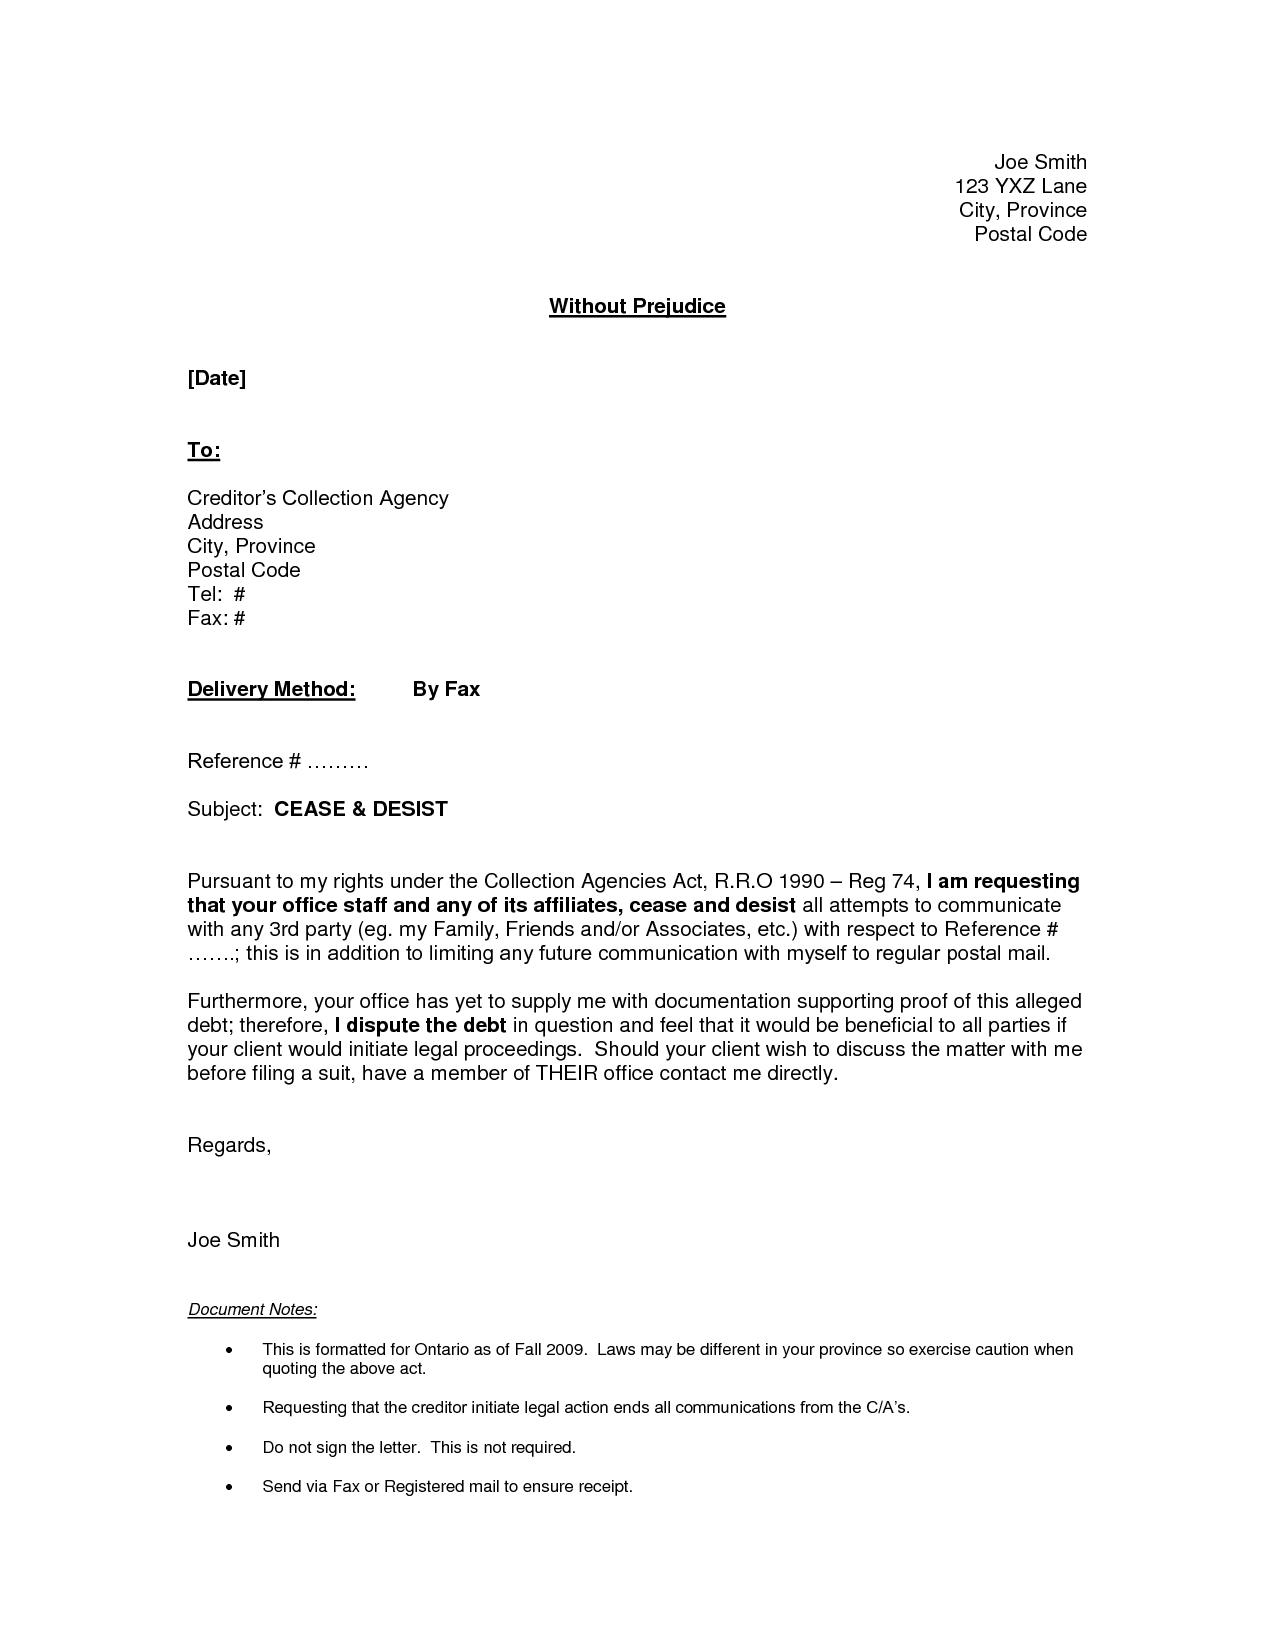 trademark-cease-and-desist-letter-sample-free-printable-documents